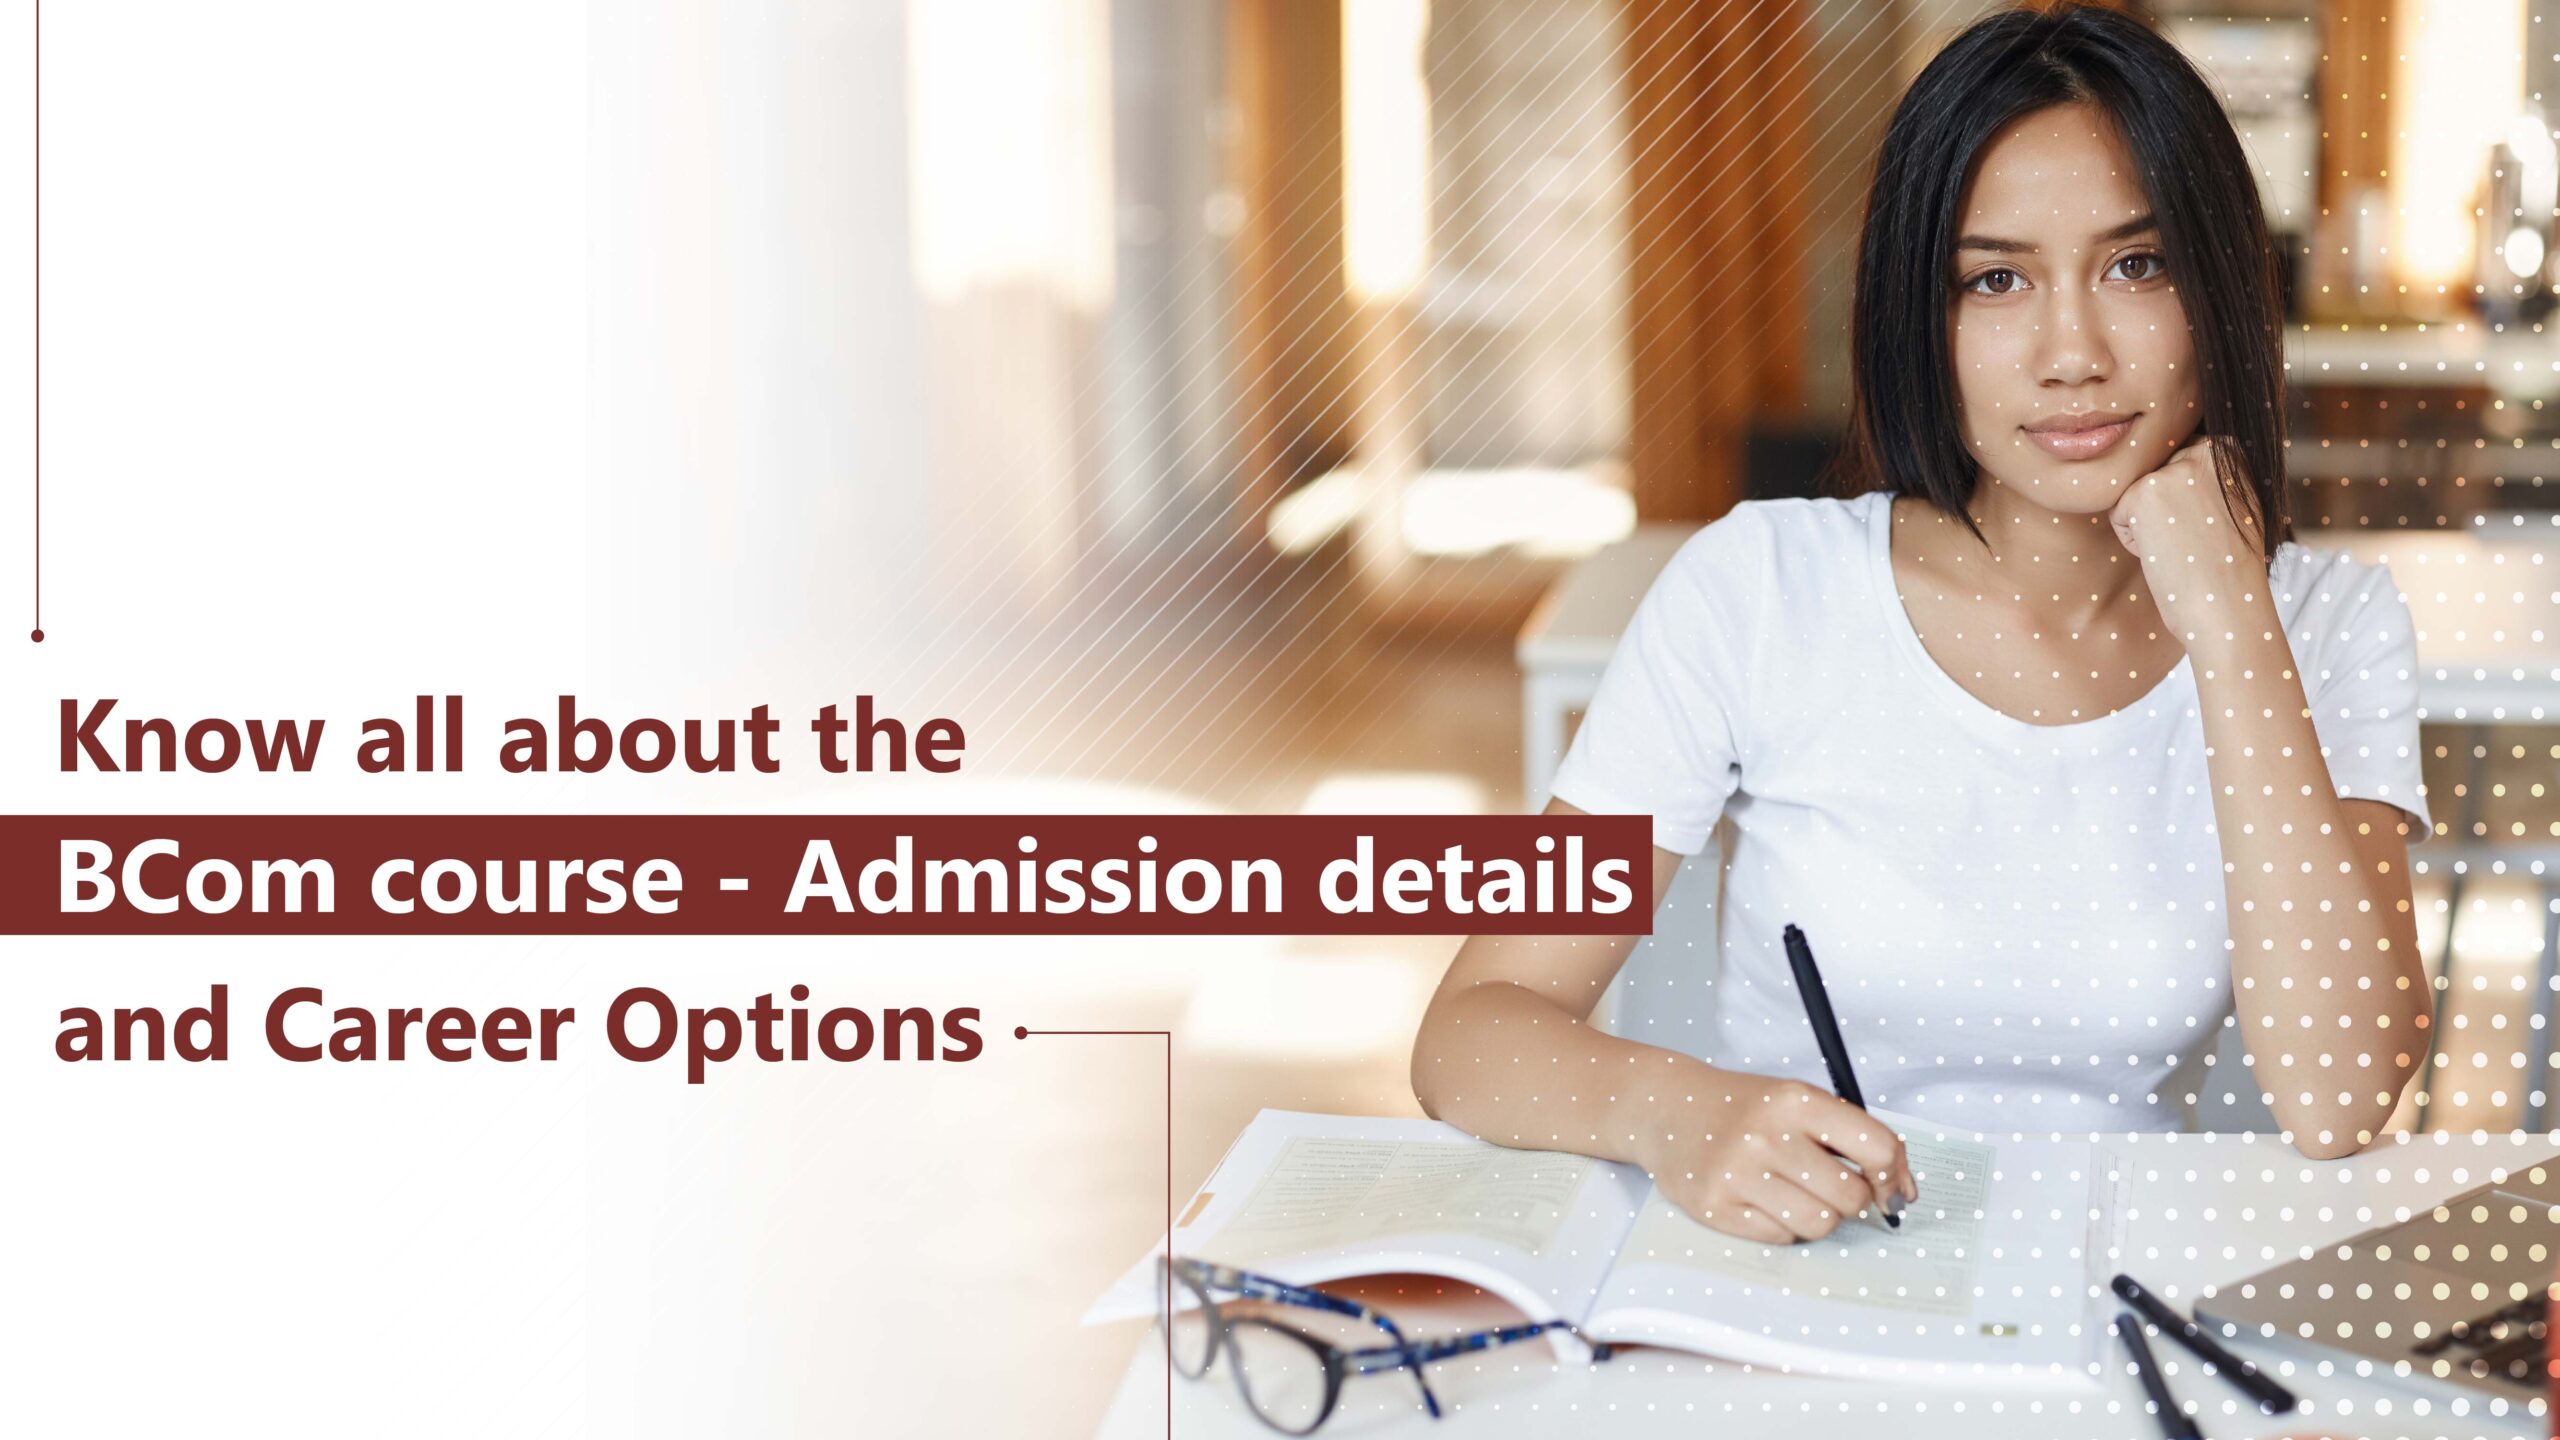 KNOW ALL ABOUT THE BCOM COURSE - ADMISSION DETAILS AND CAREER OPTIONS